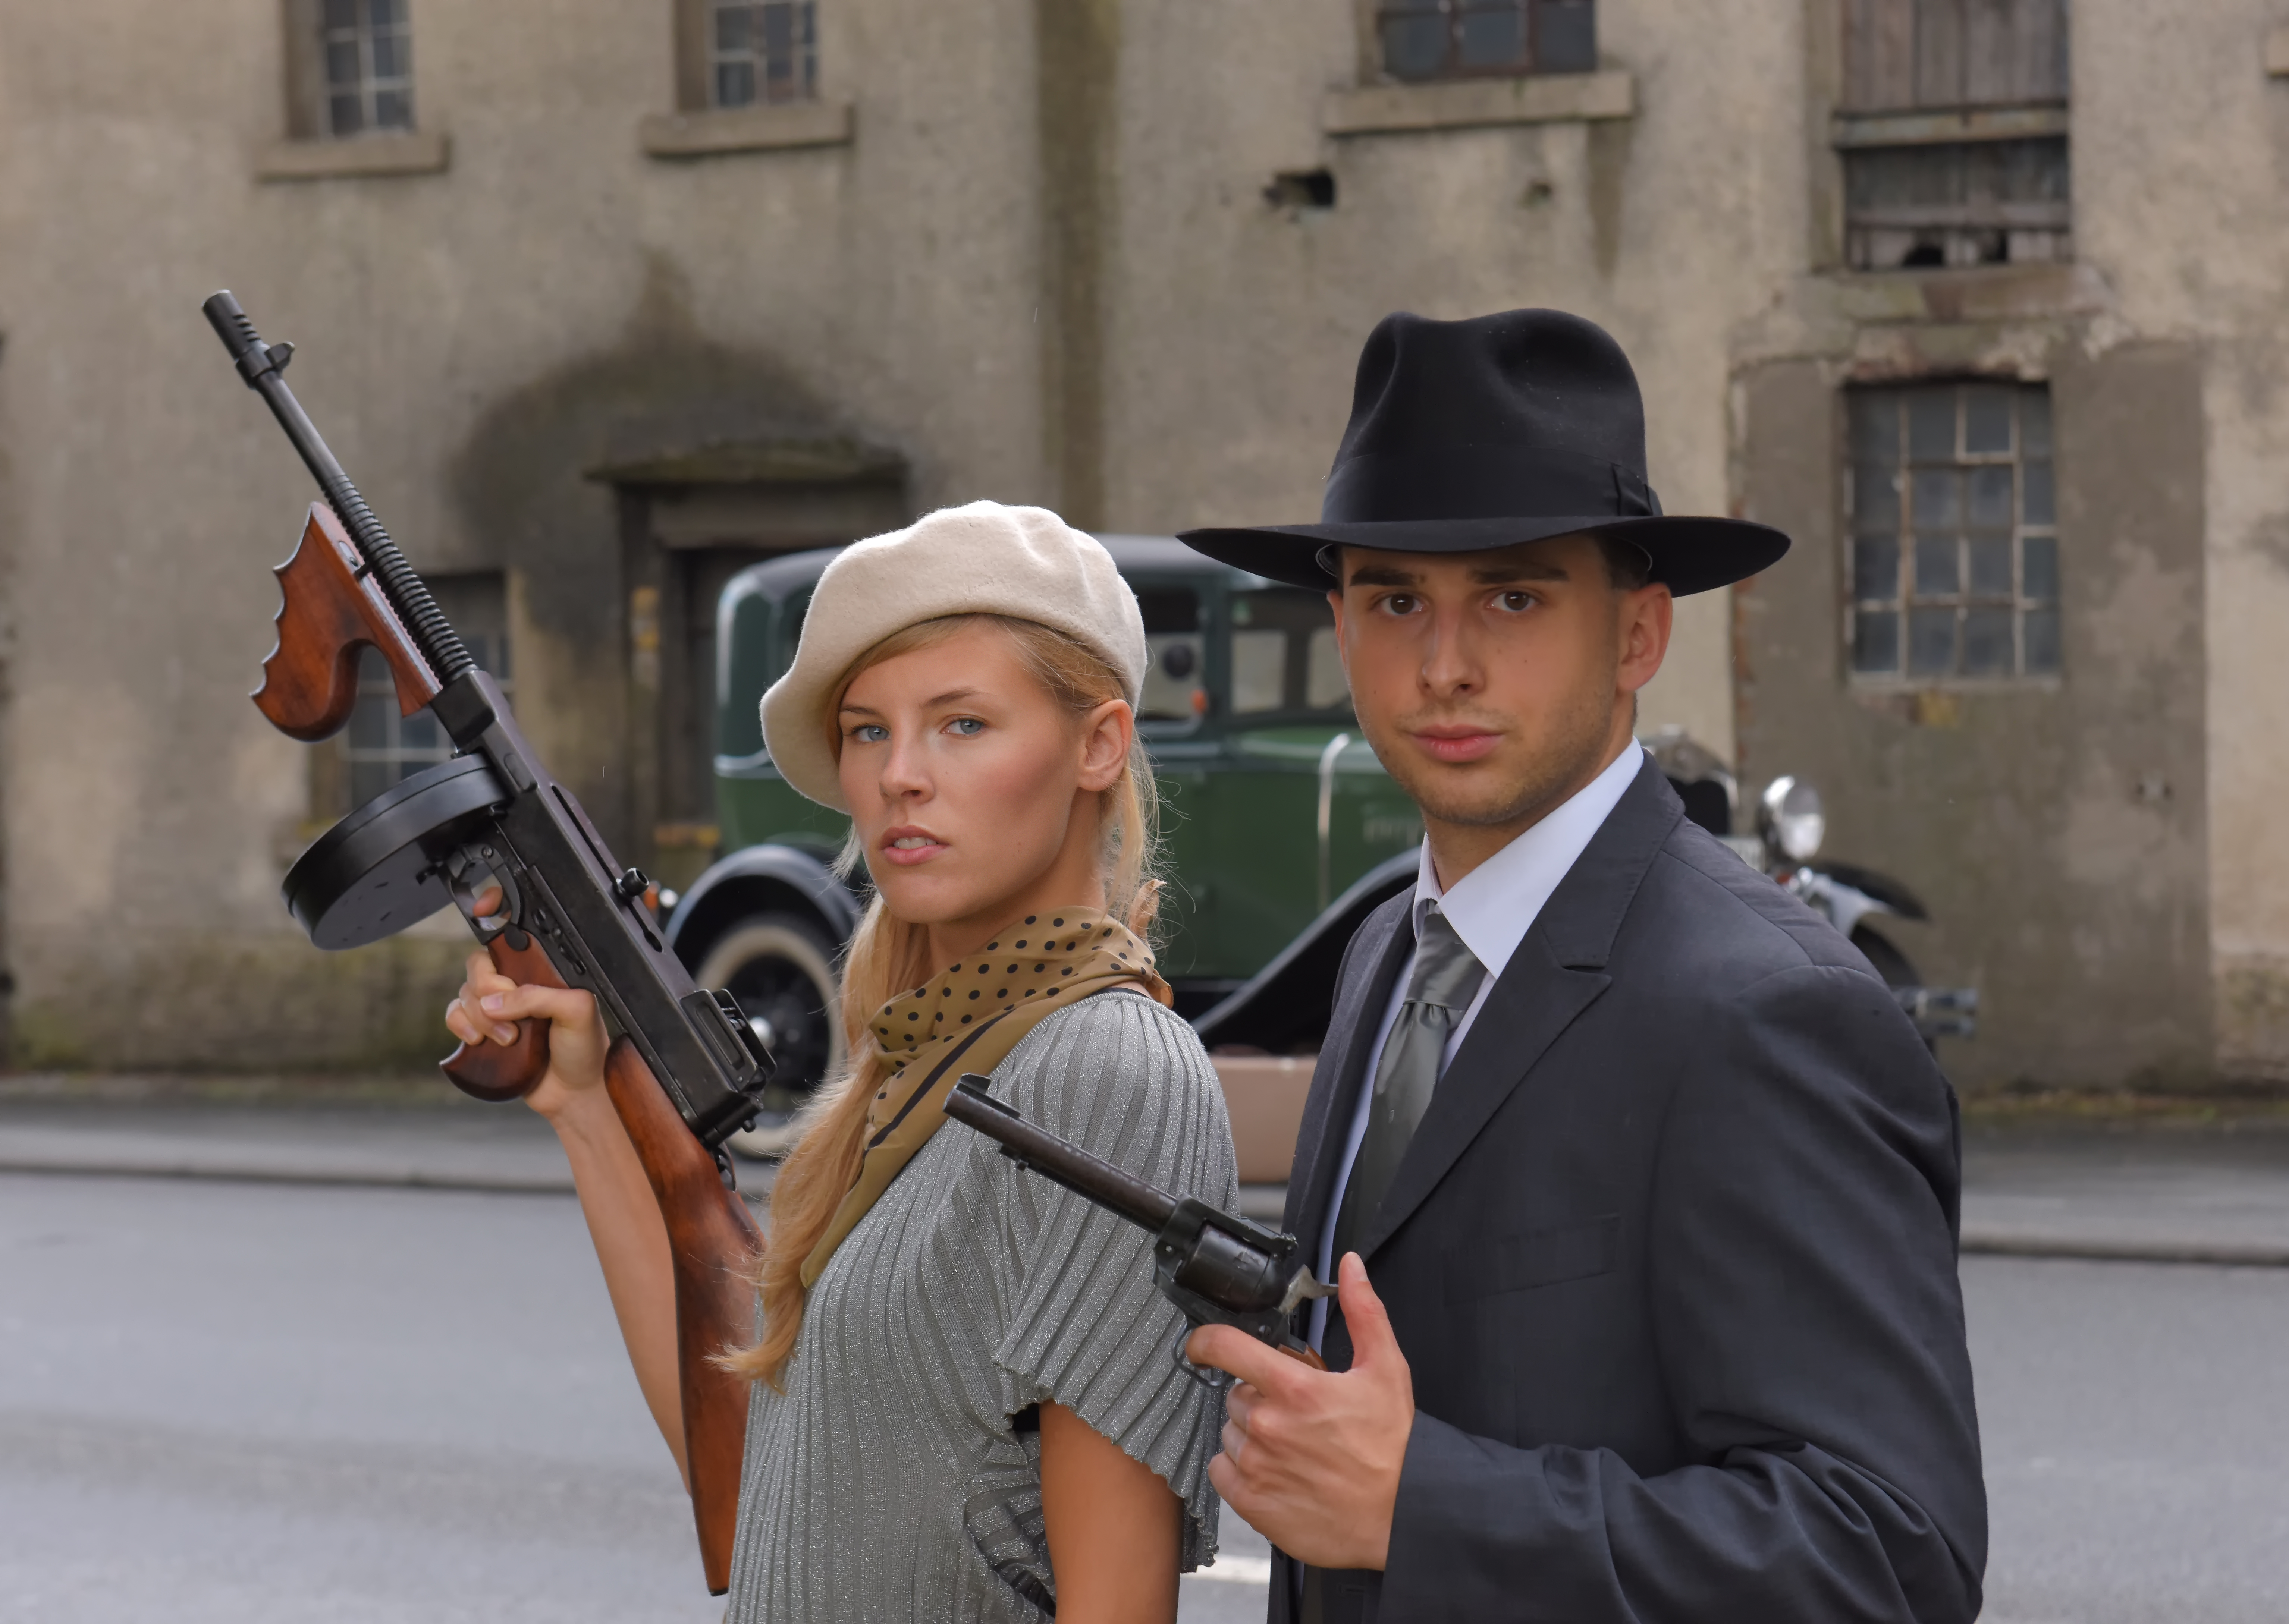 the real bonnie and clyde costumes